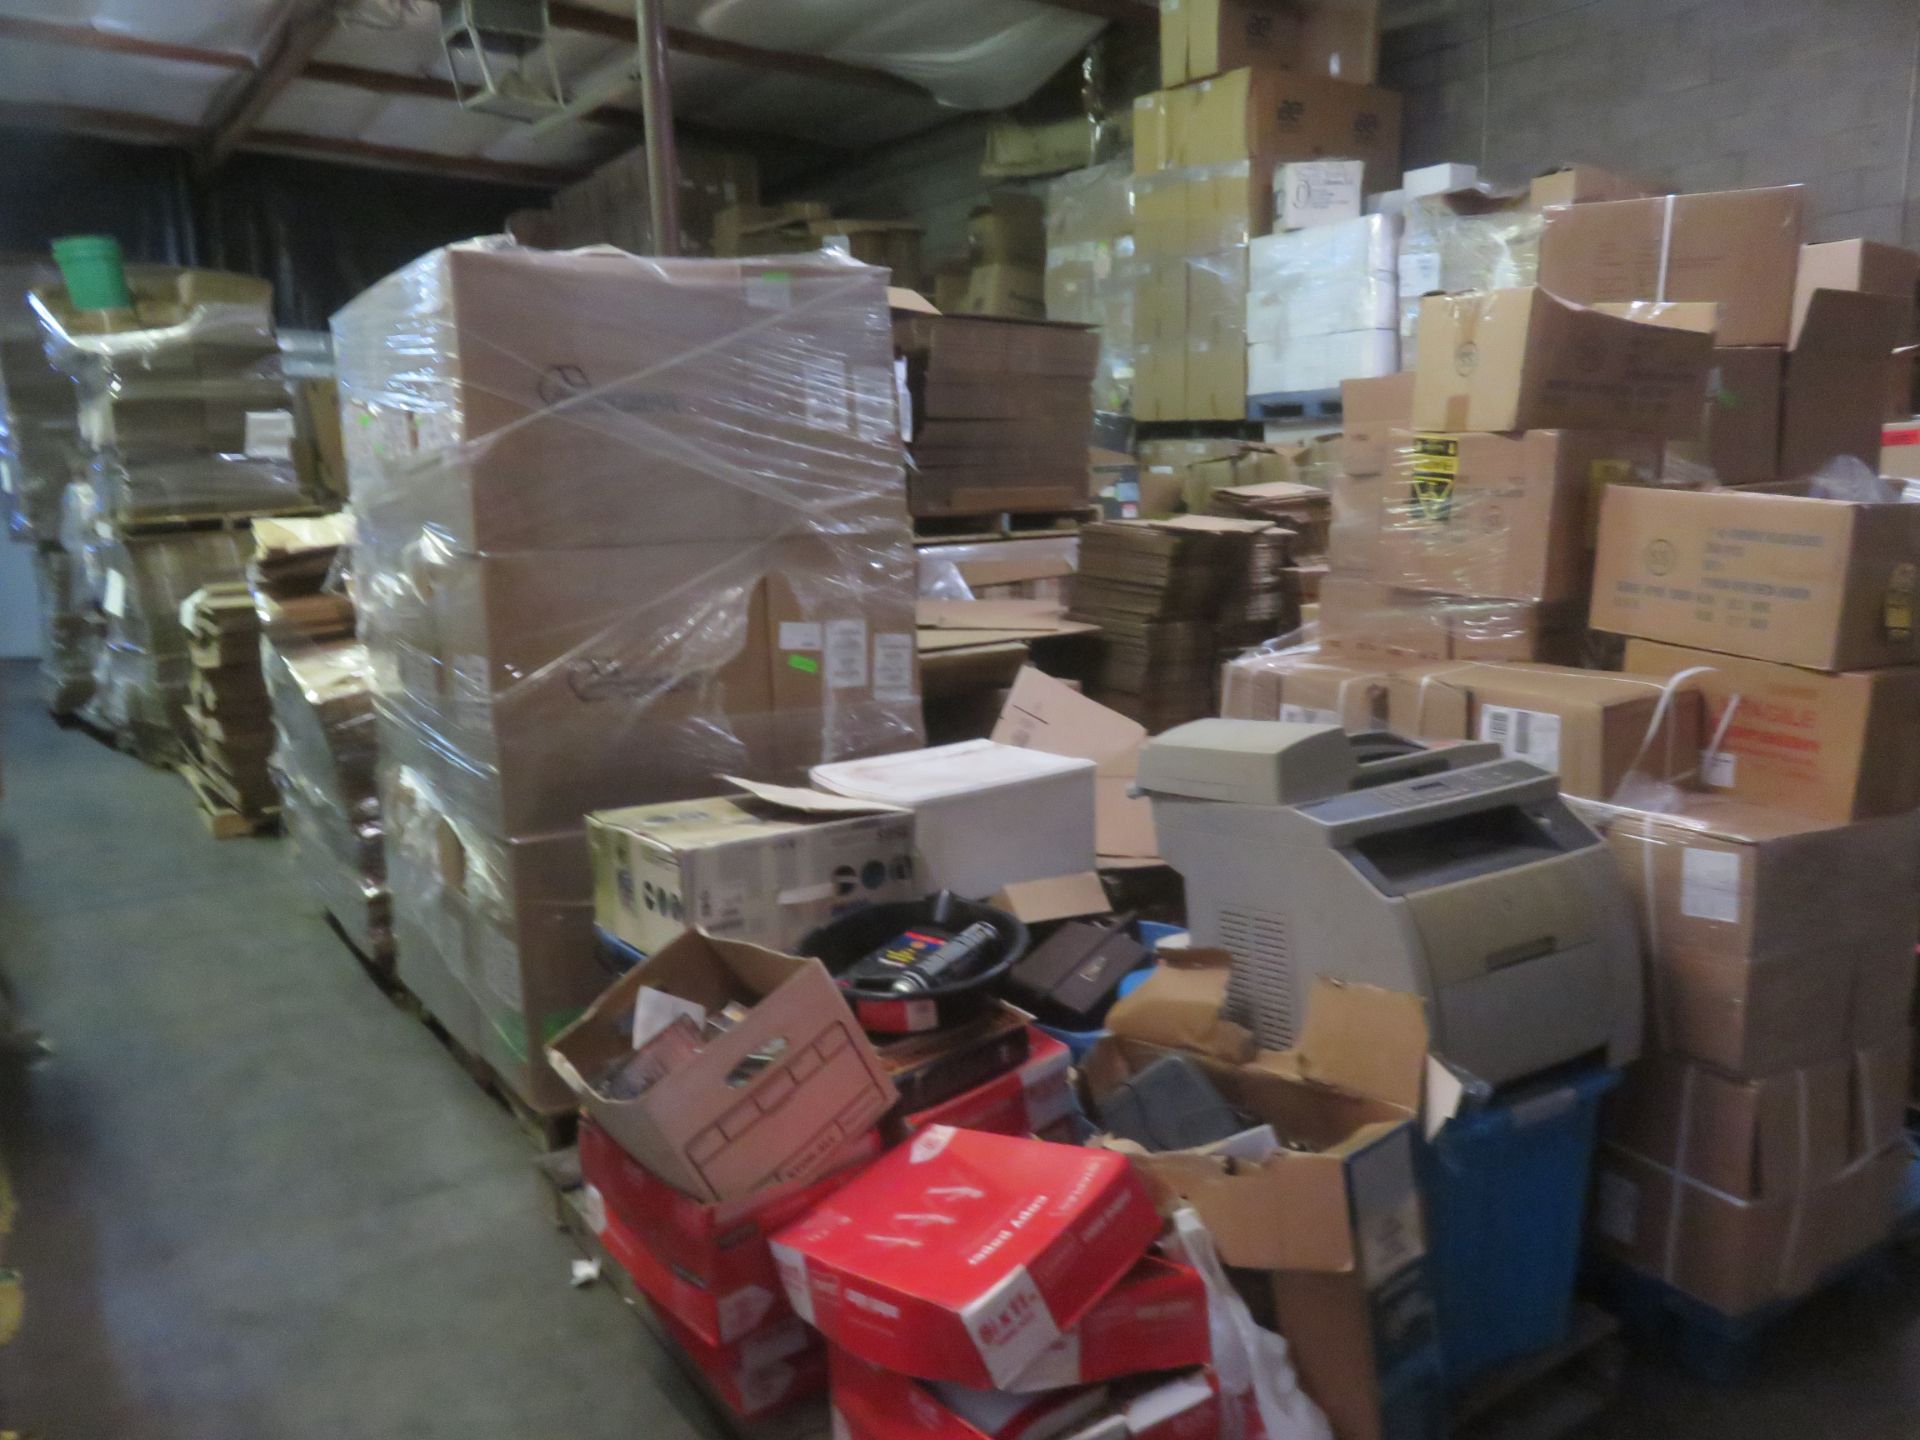 LOT DOUBLE ROW OF PACKAGING MATERIALS, BOXES, ETC. - Image 5 of 8